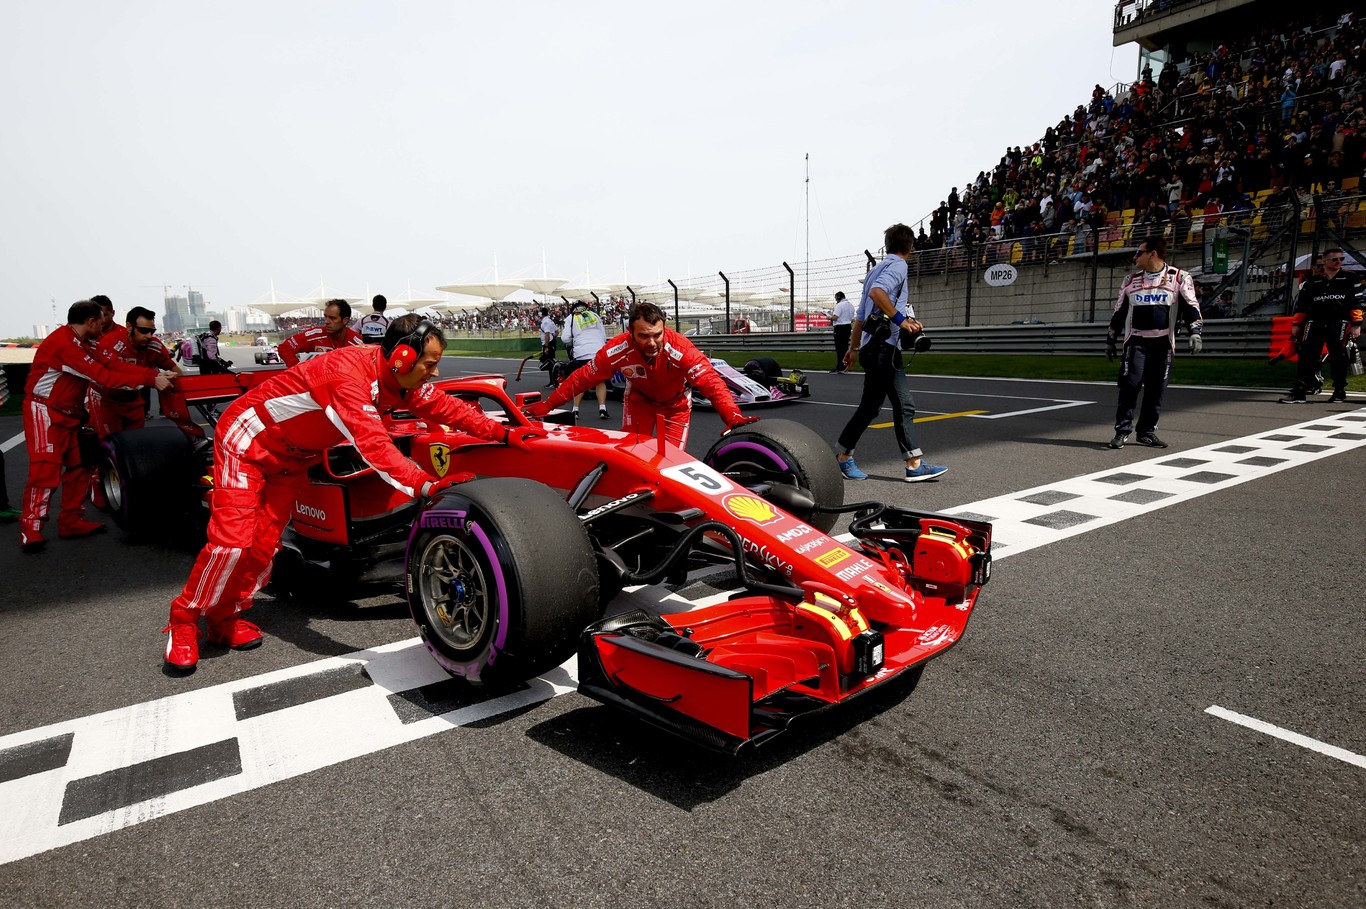 Formula 1 has taken a stake in a small Irish fantasy sports firm Fora